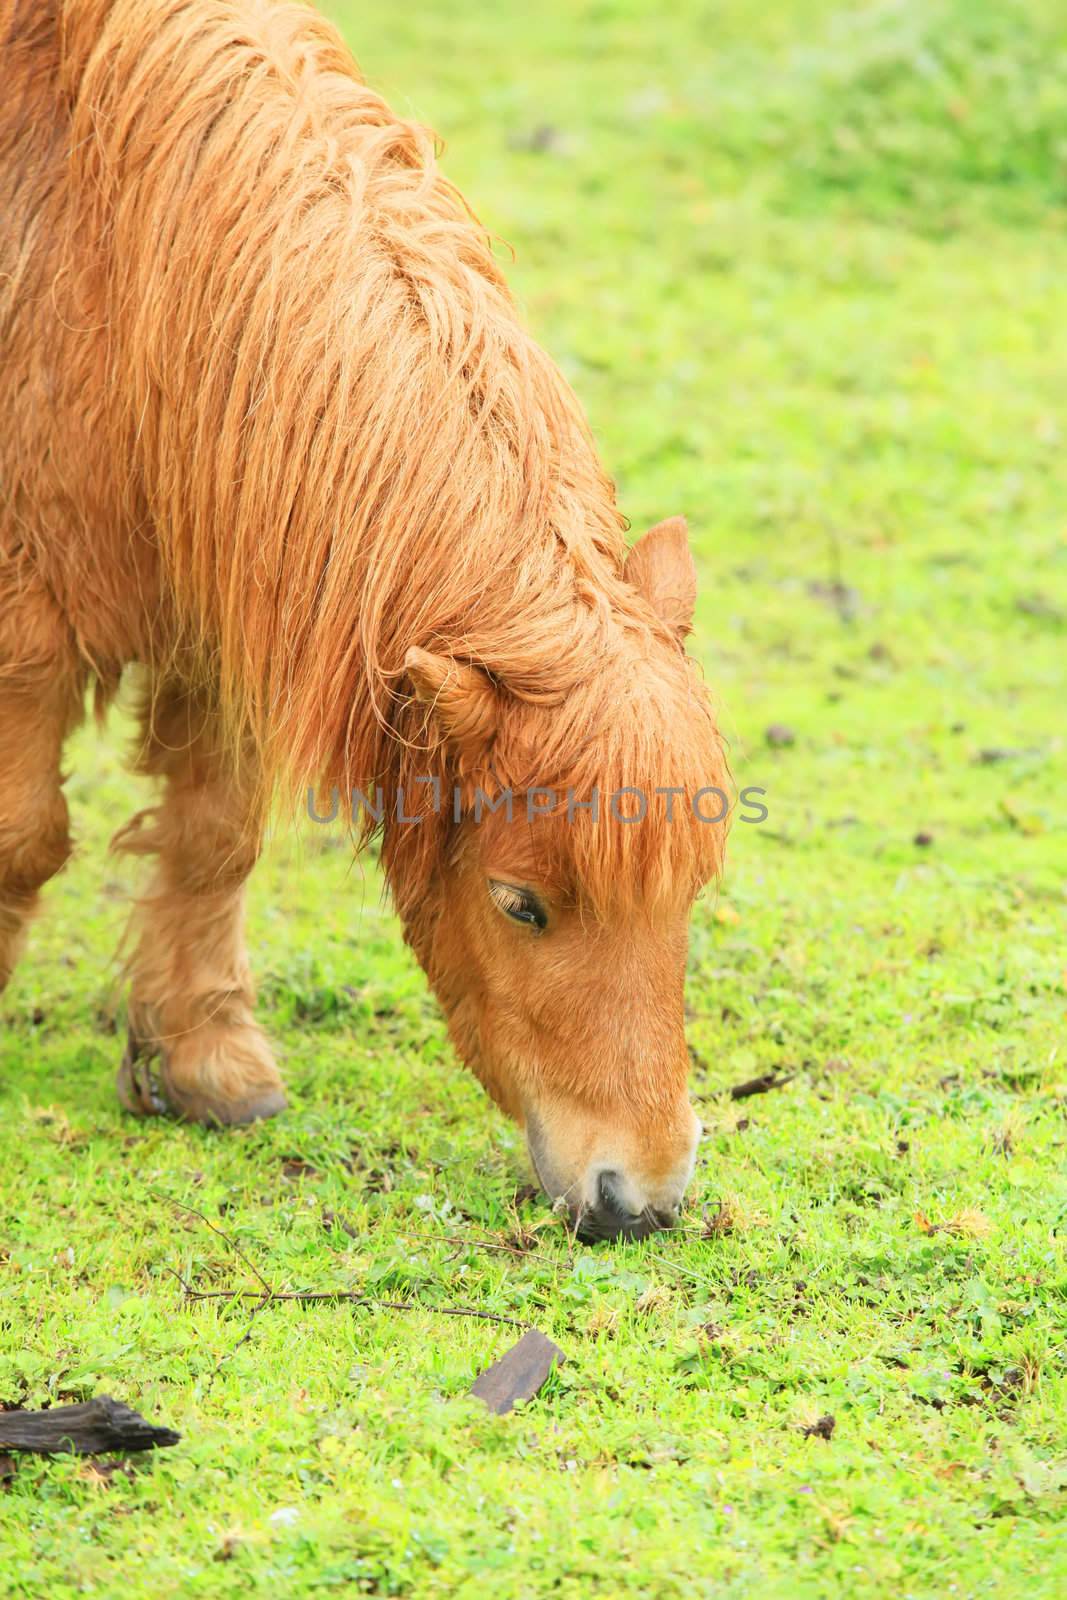 Pony Eating Grass in the Rural Outdoors